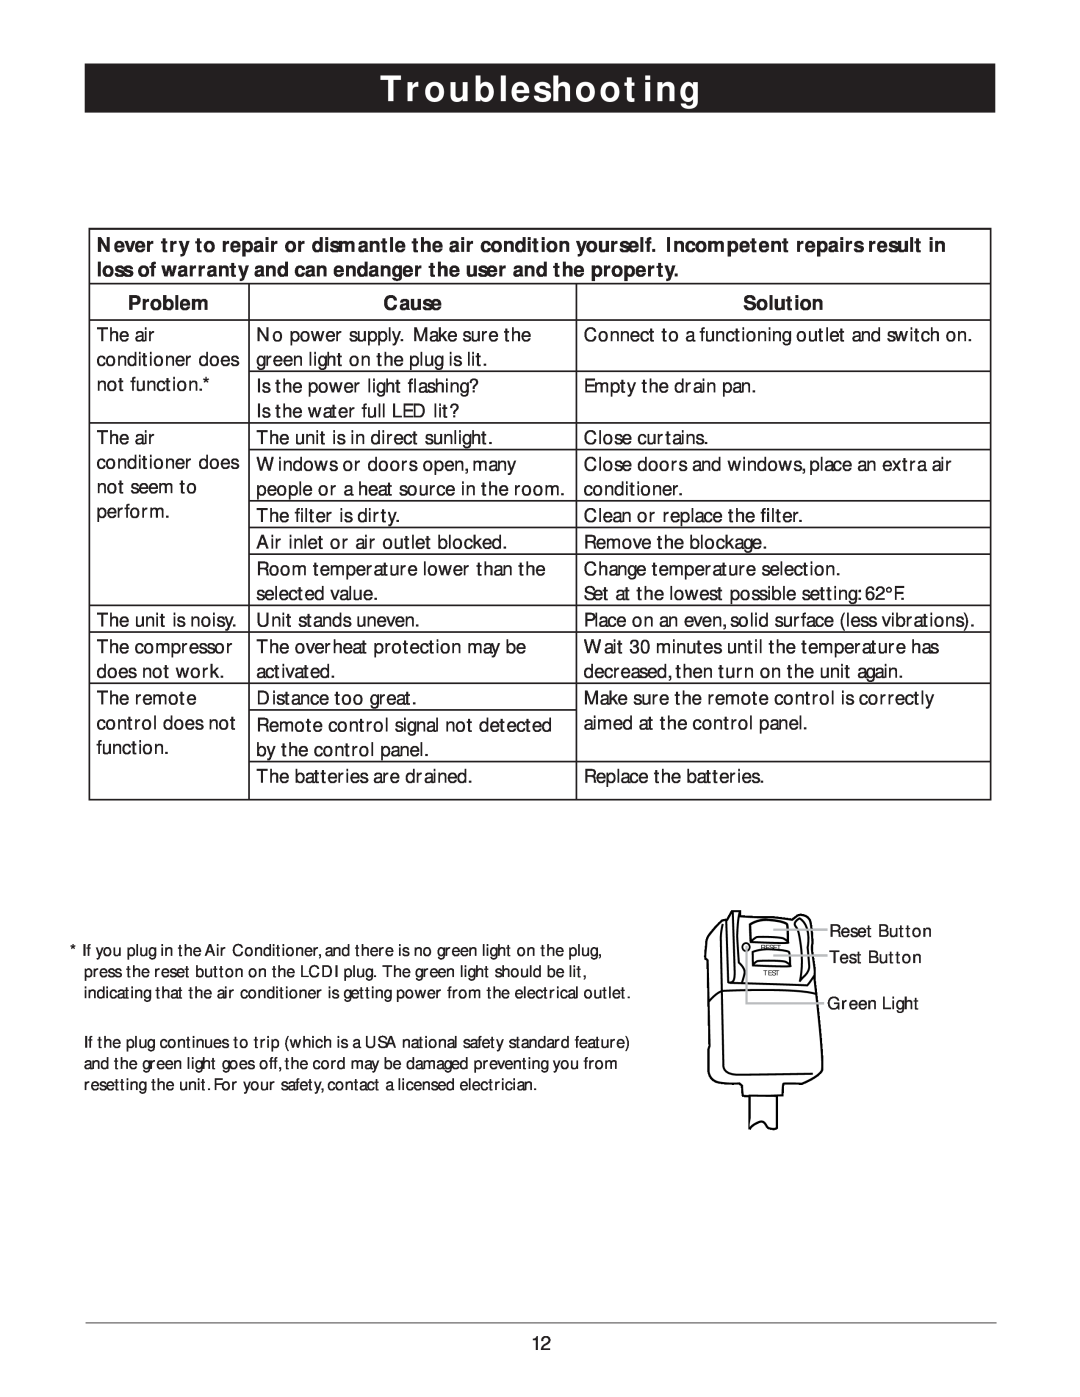 Amcor PORTABLE AIRCONDITIONER owner manual Troubleshooting, Problem, Cause, Solution 